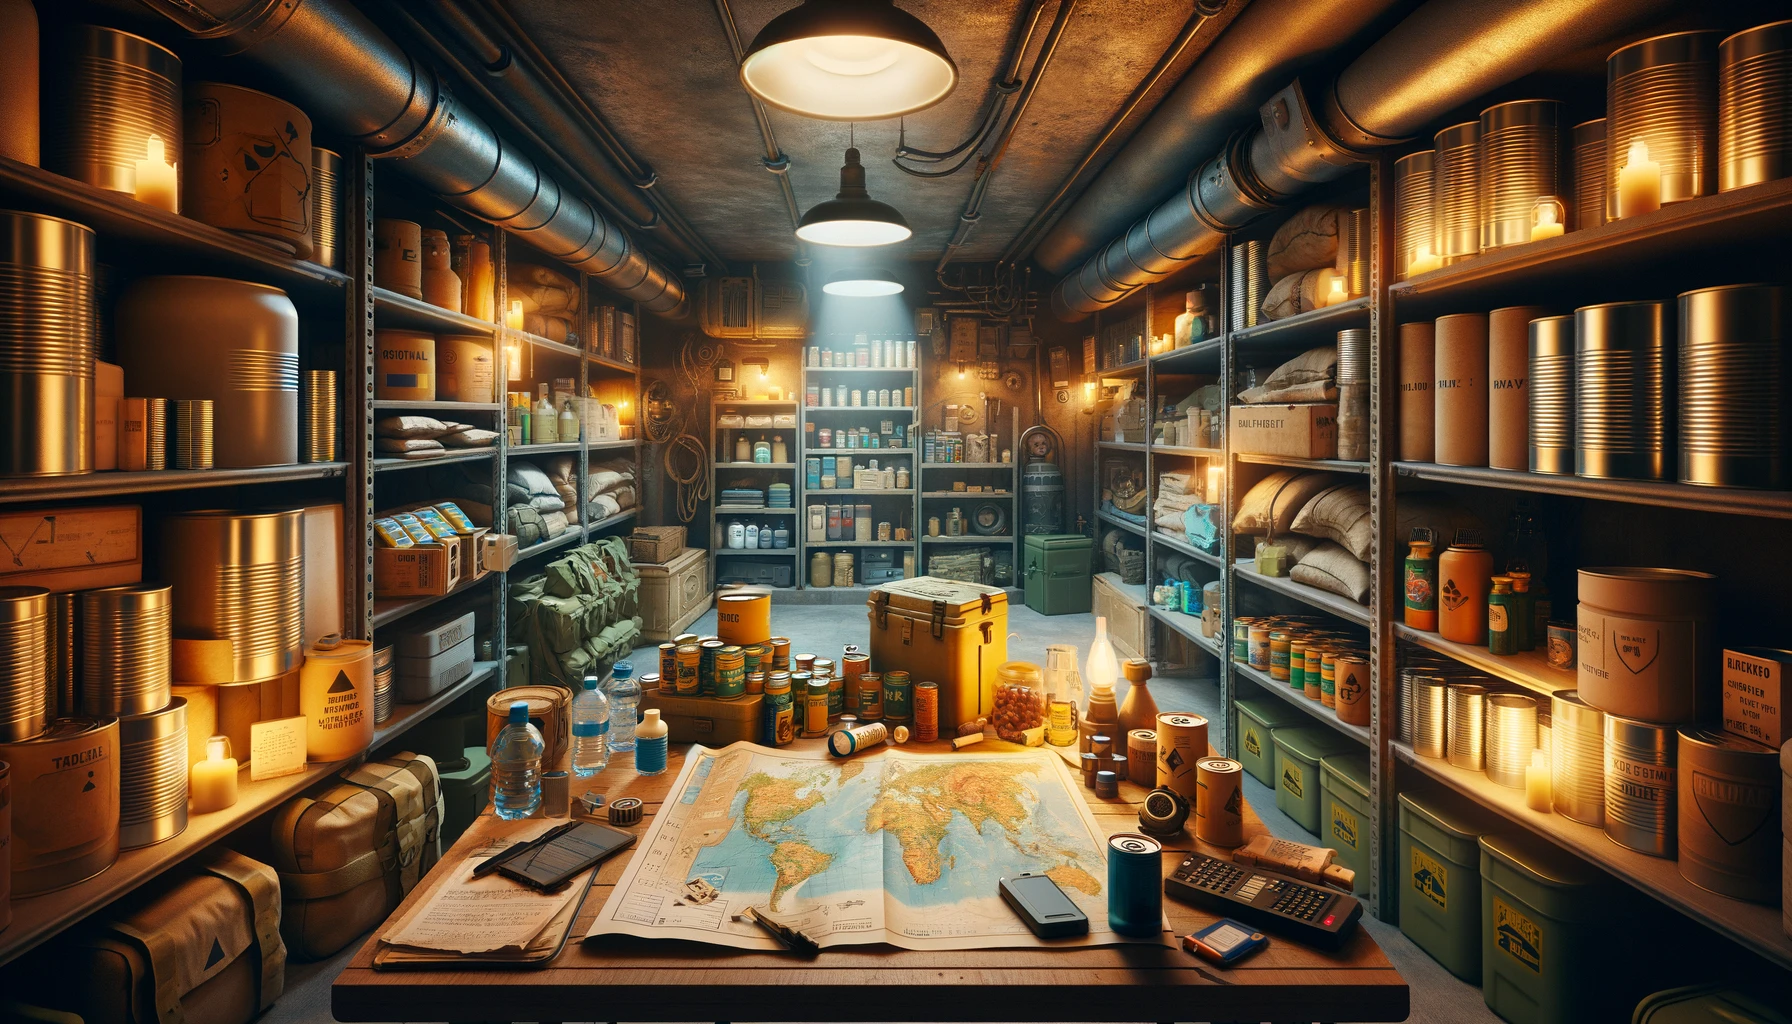 Well-organized underground doomsday prepper bunker showcasing a variety of survival essentials including canned foods, water purification systems, medical supplies, a map with routes, radios, batteries, and survival guides, all illuminated by warm ambient lighting for a secure atmosphere